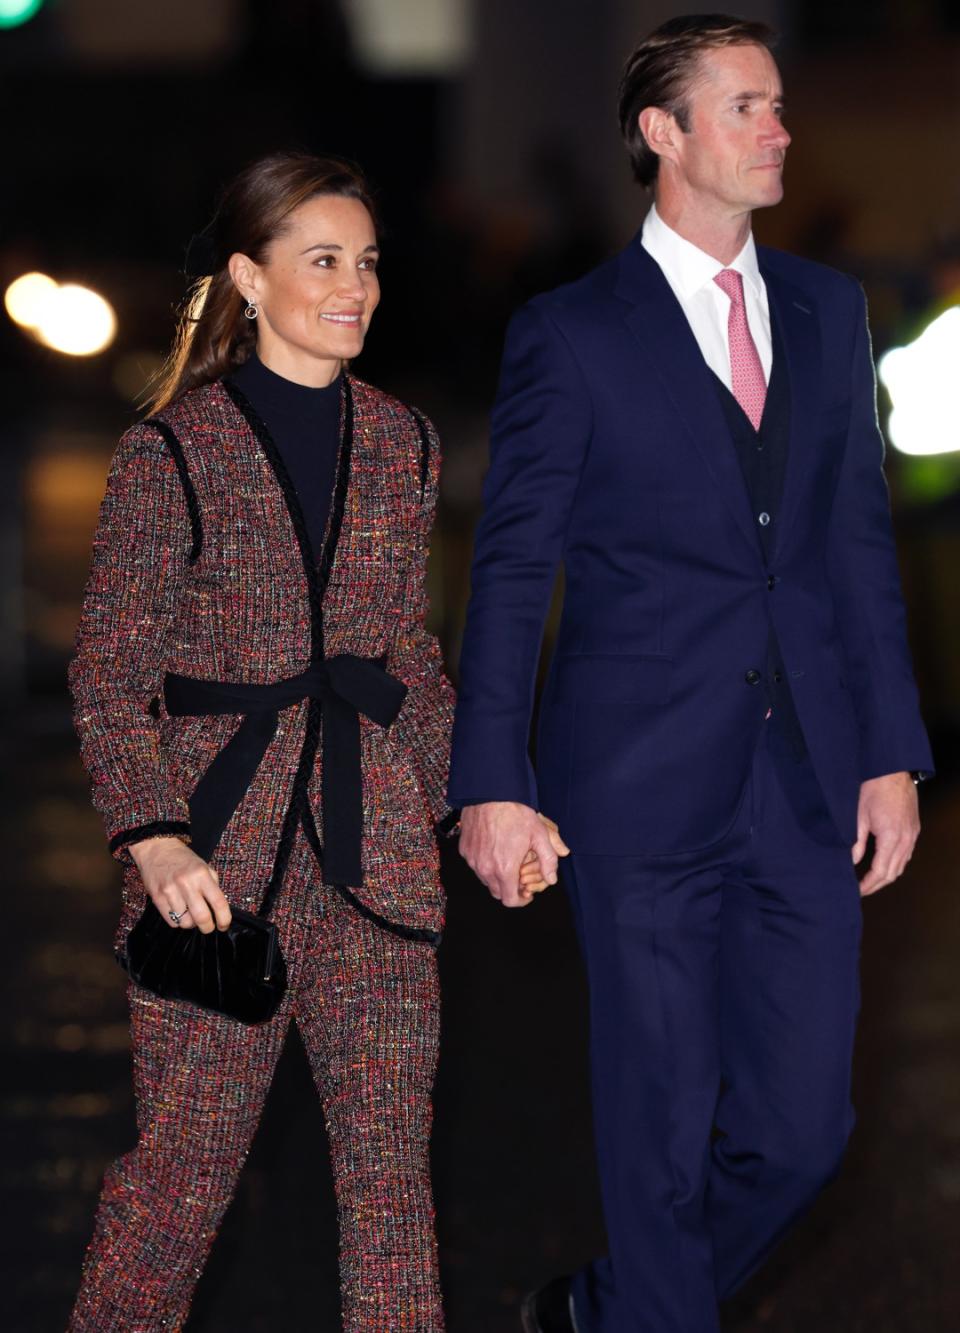 Pippa supports Kate during a tough time